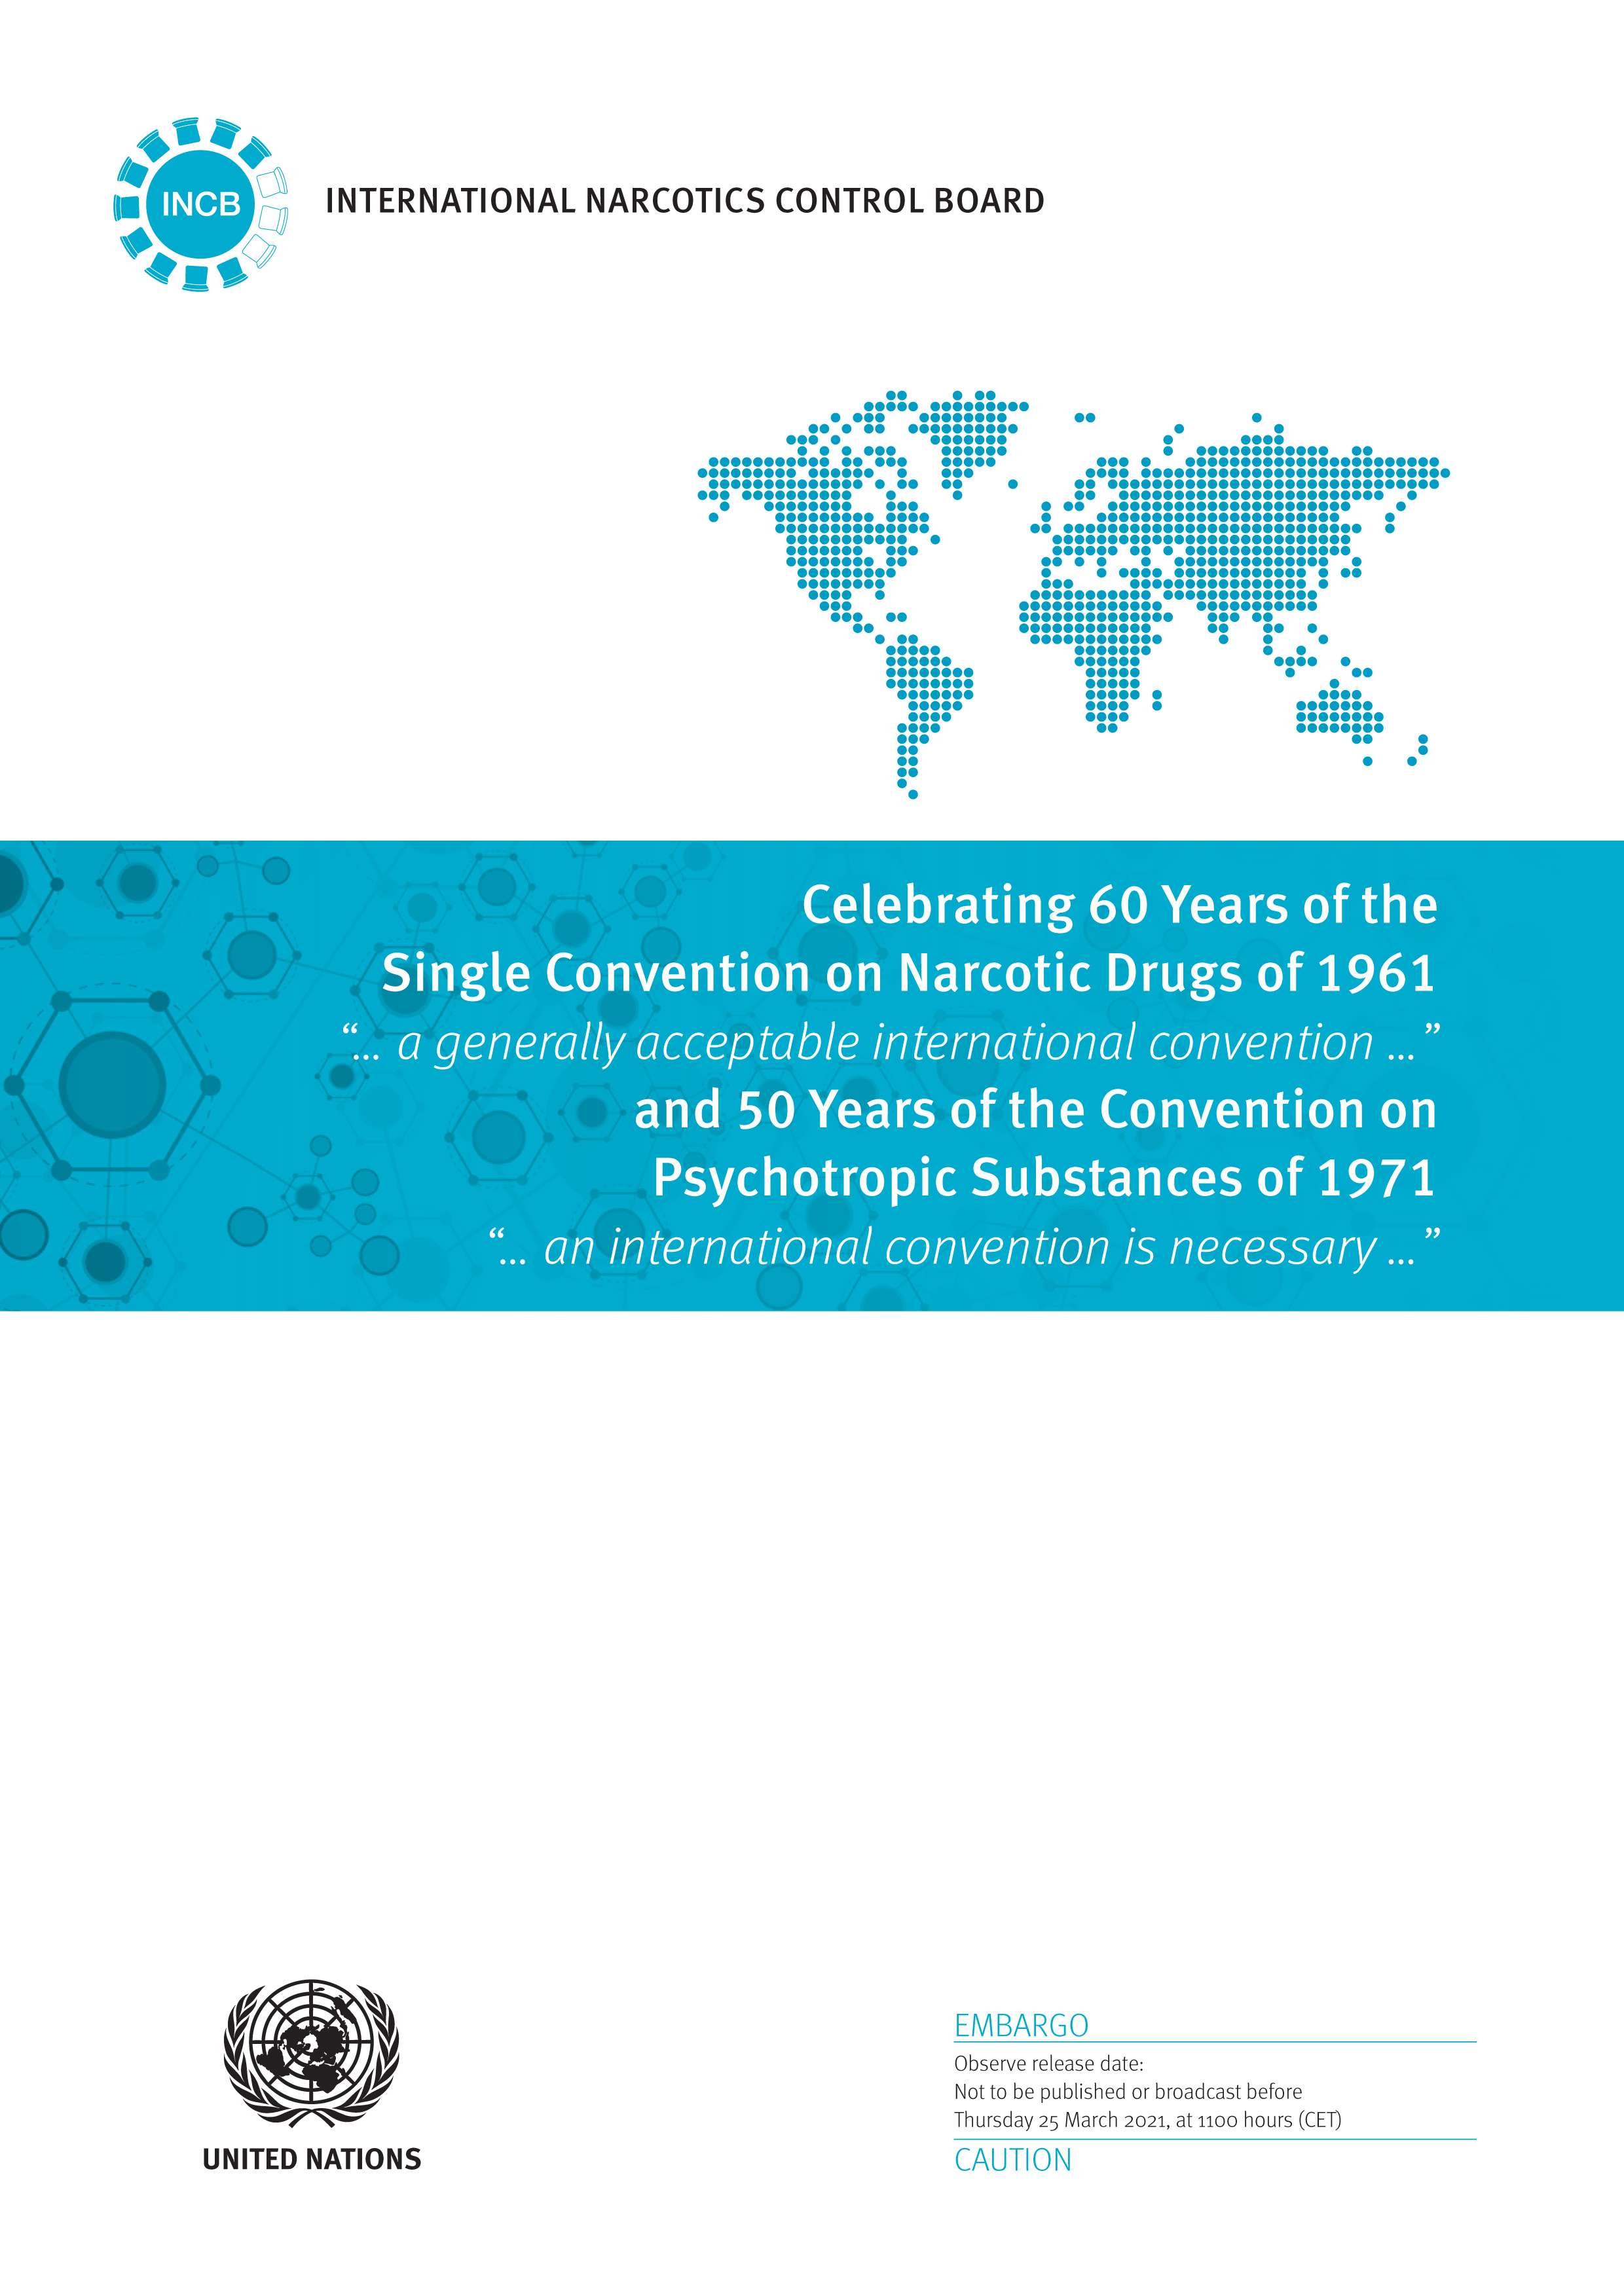 image of Celebrating 60 Years of the Single Convention on Narcotic Drugs of 1961 and 50 Years of the Convention on Psychotropic Substances of 1971